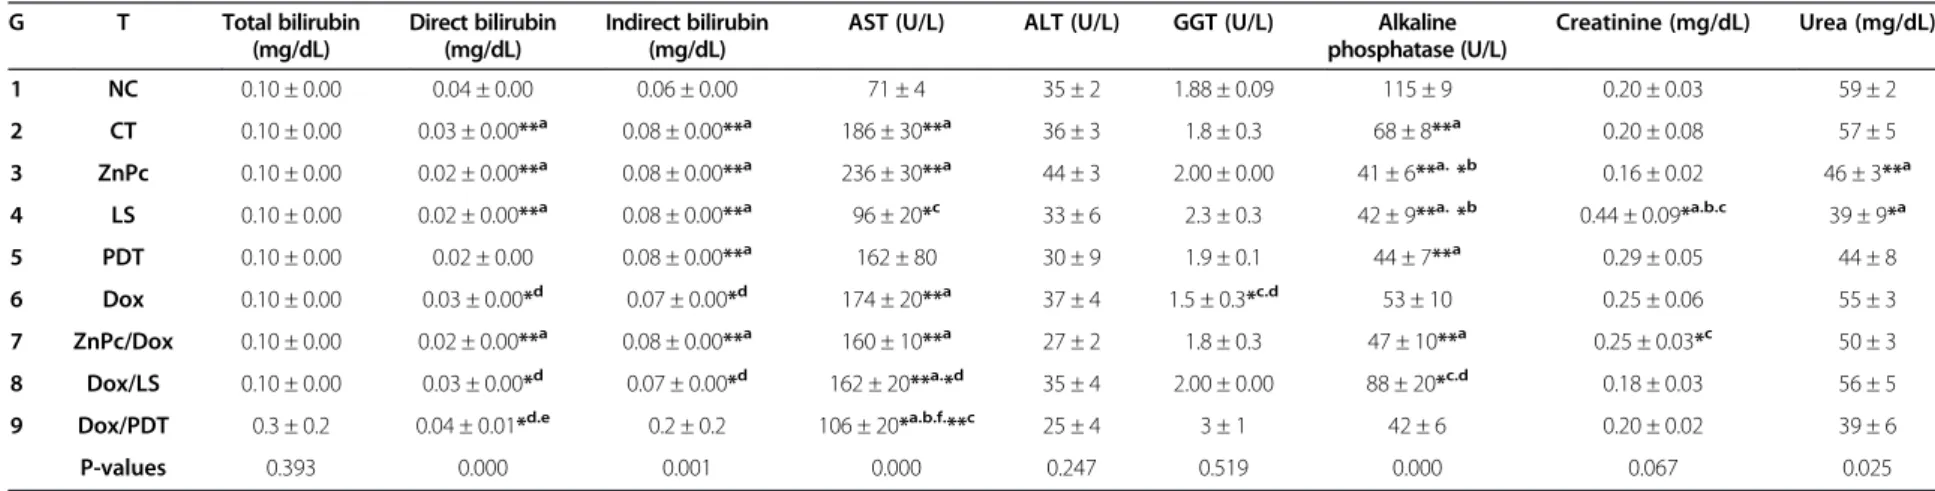 Table 4 Effects of ZnPcS 4 -AN-based PDT and/or Dox treatments on biochemical parameters of healthy and Ehrlich solid tumor-bearing mice G T Total bilirubin (mg/dL) Direct bilirubin(mg/dL) Indirect bilirubin(mg/dL)